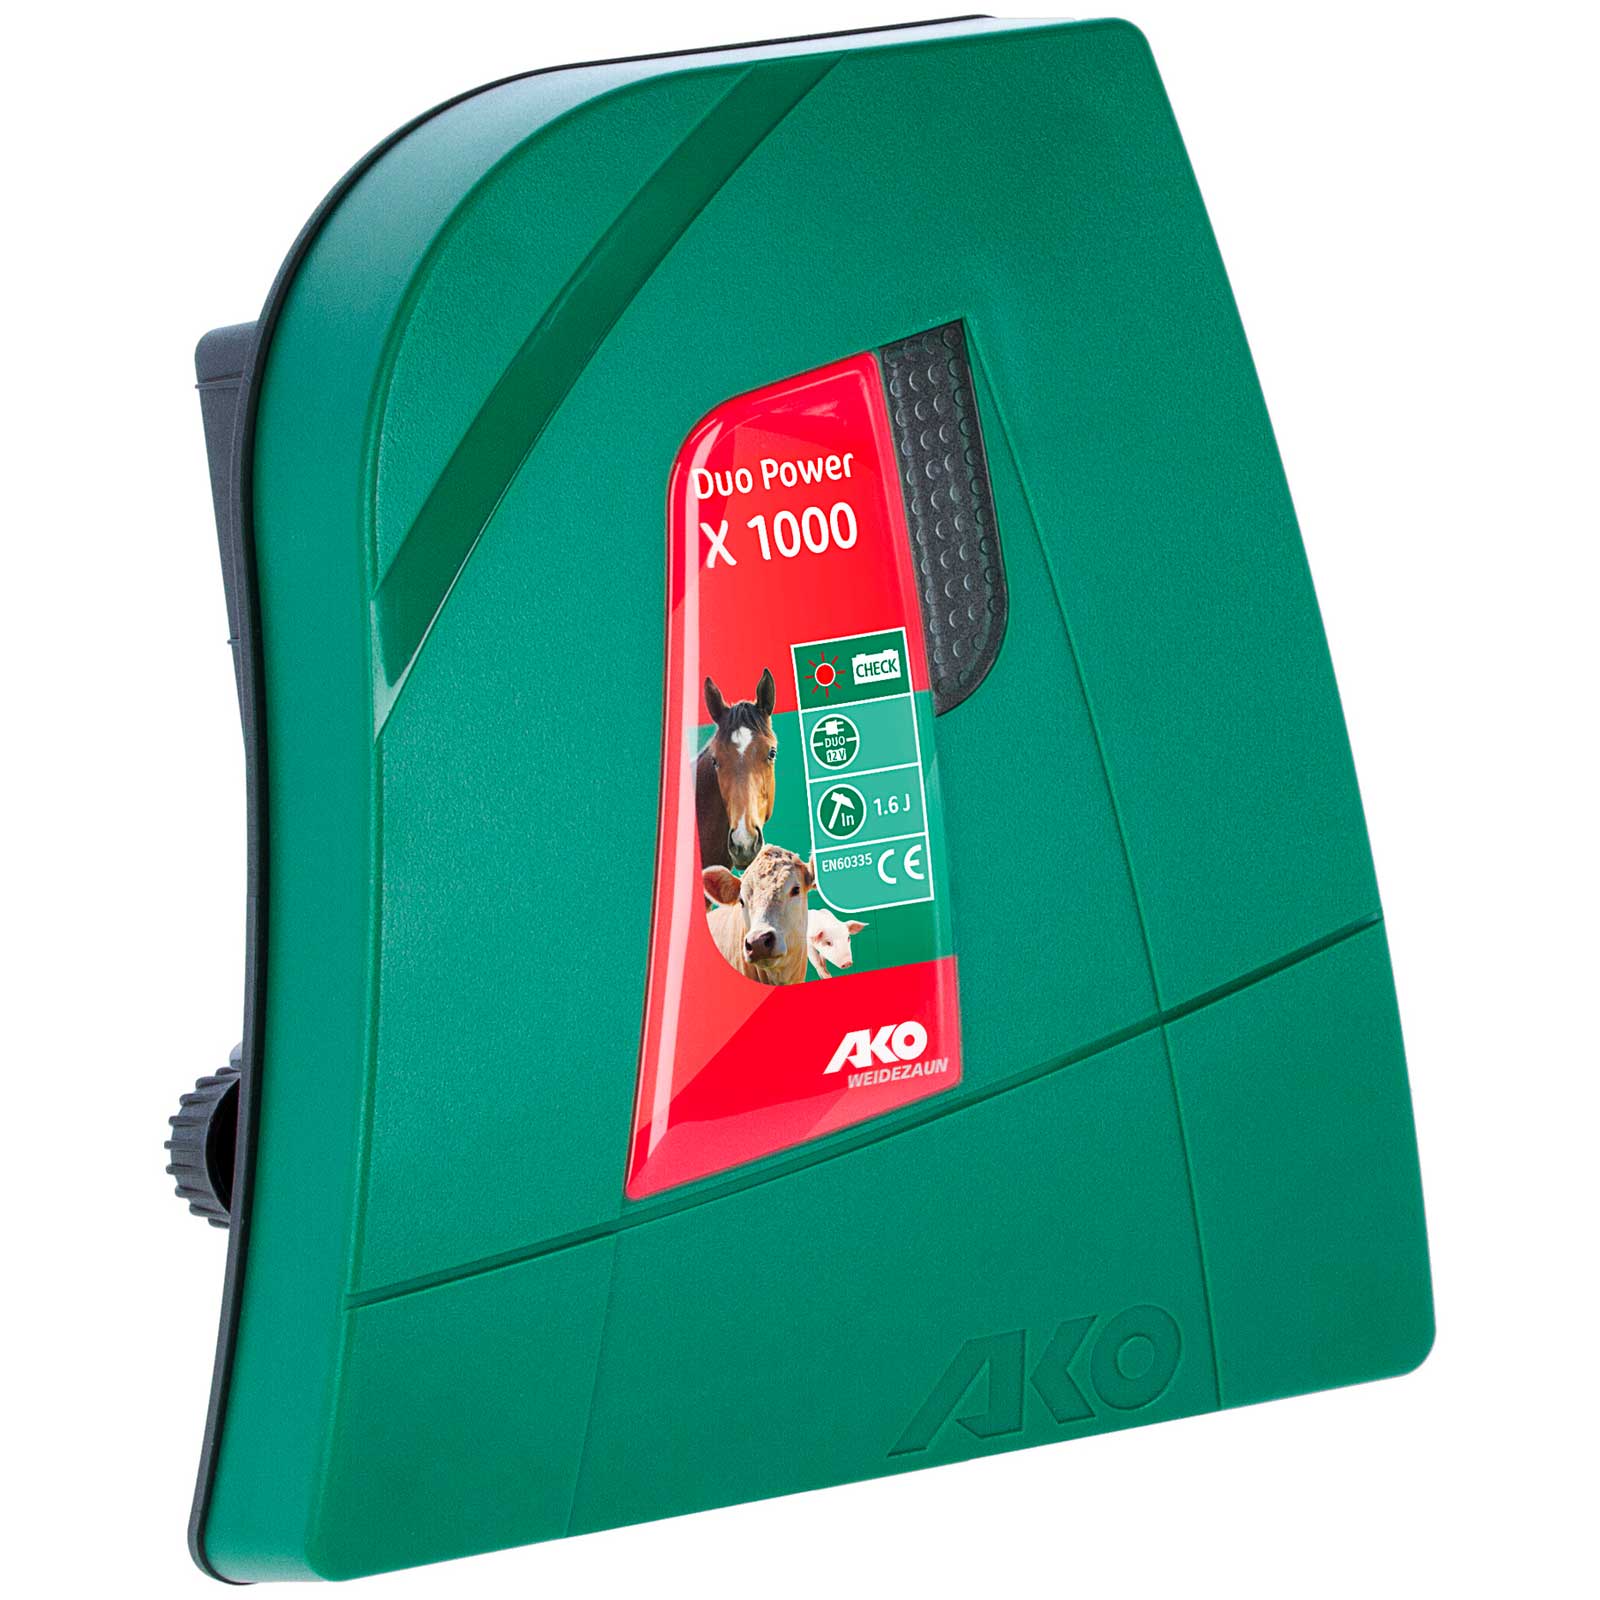 AKO Duo Power X 1000 electric fence energiser 12V / 230V, 1,6 joules